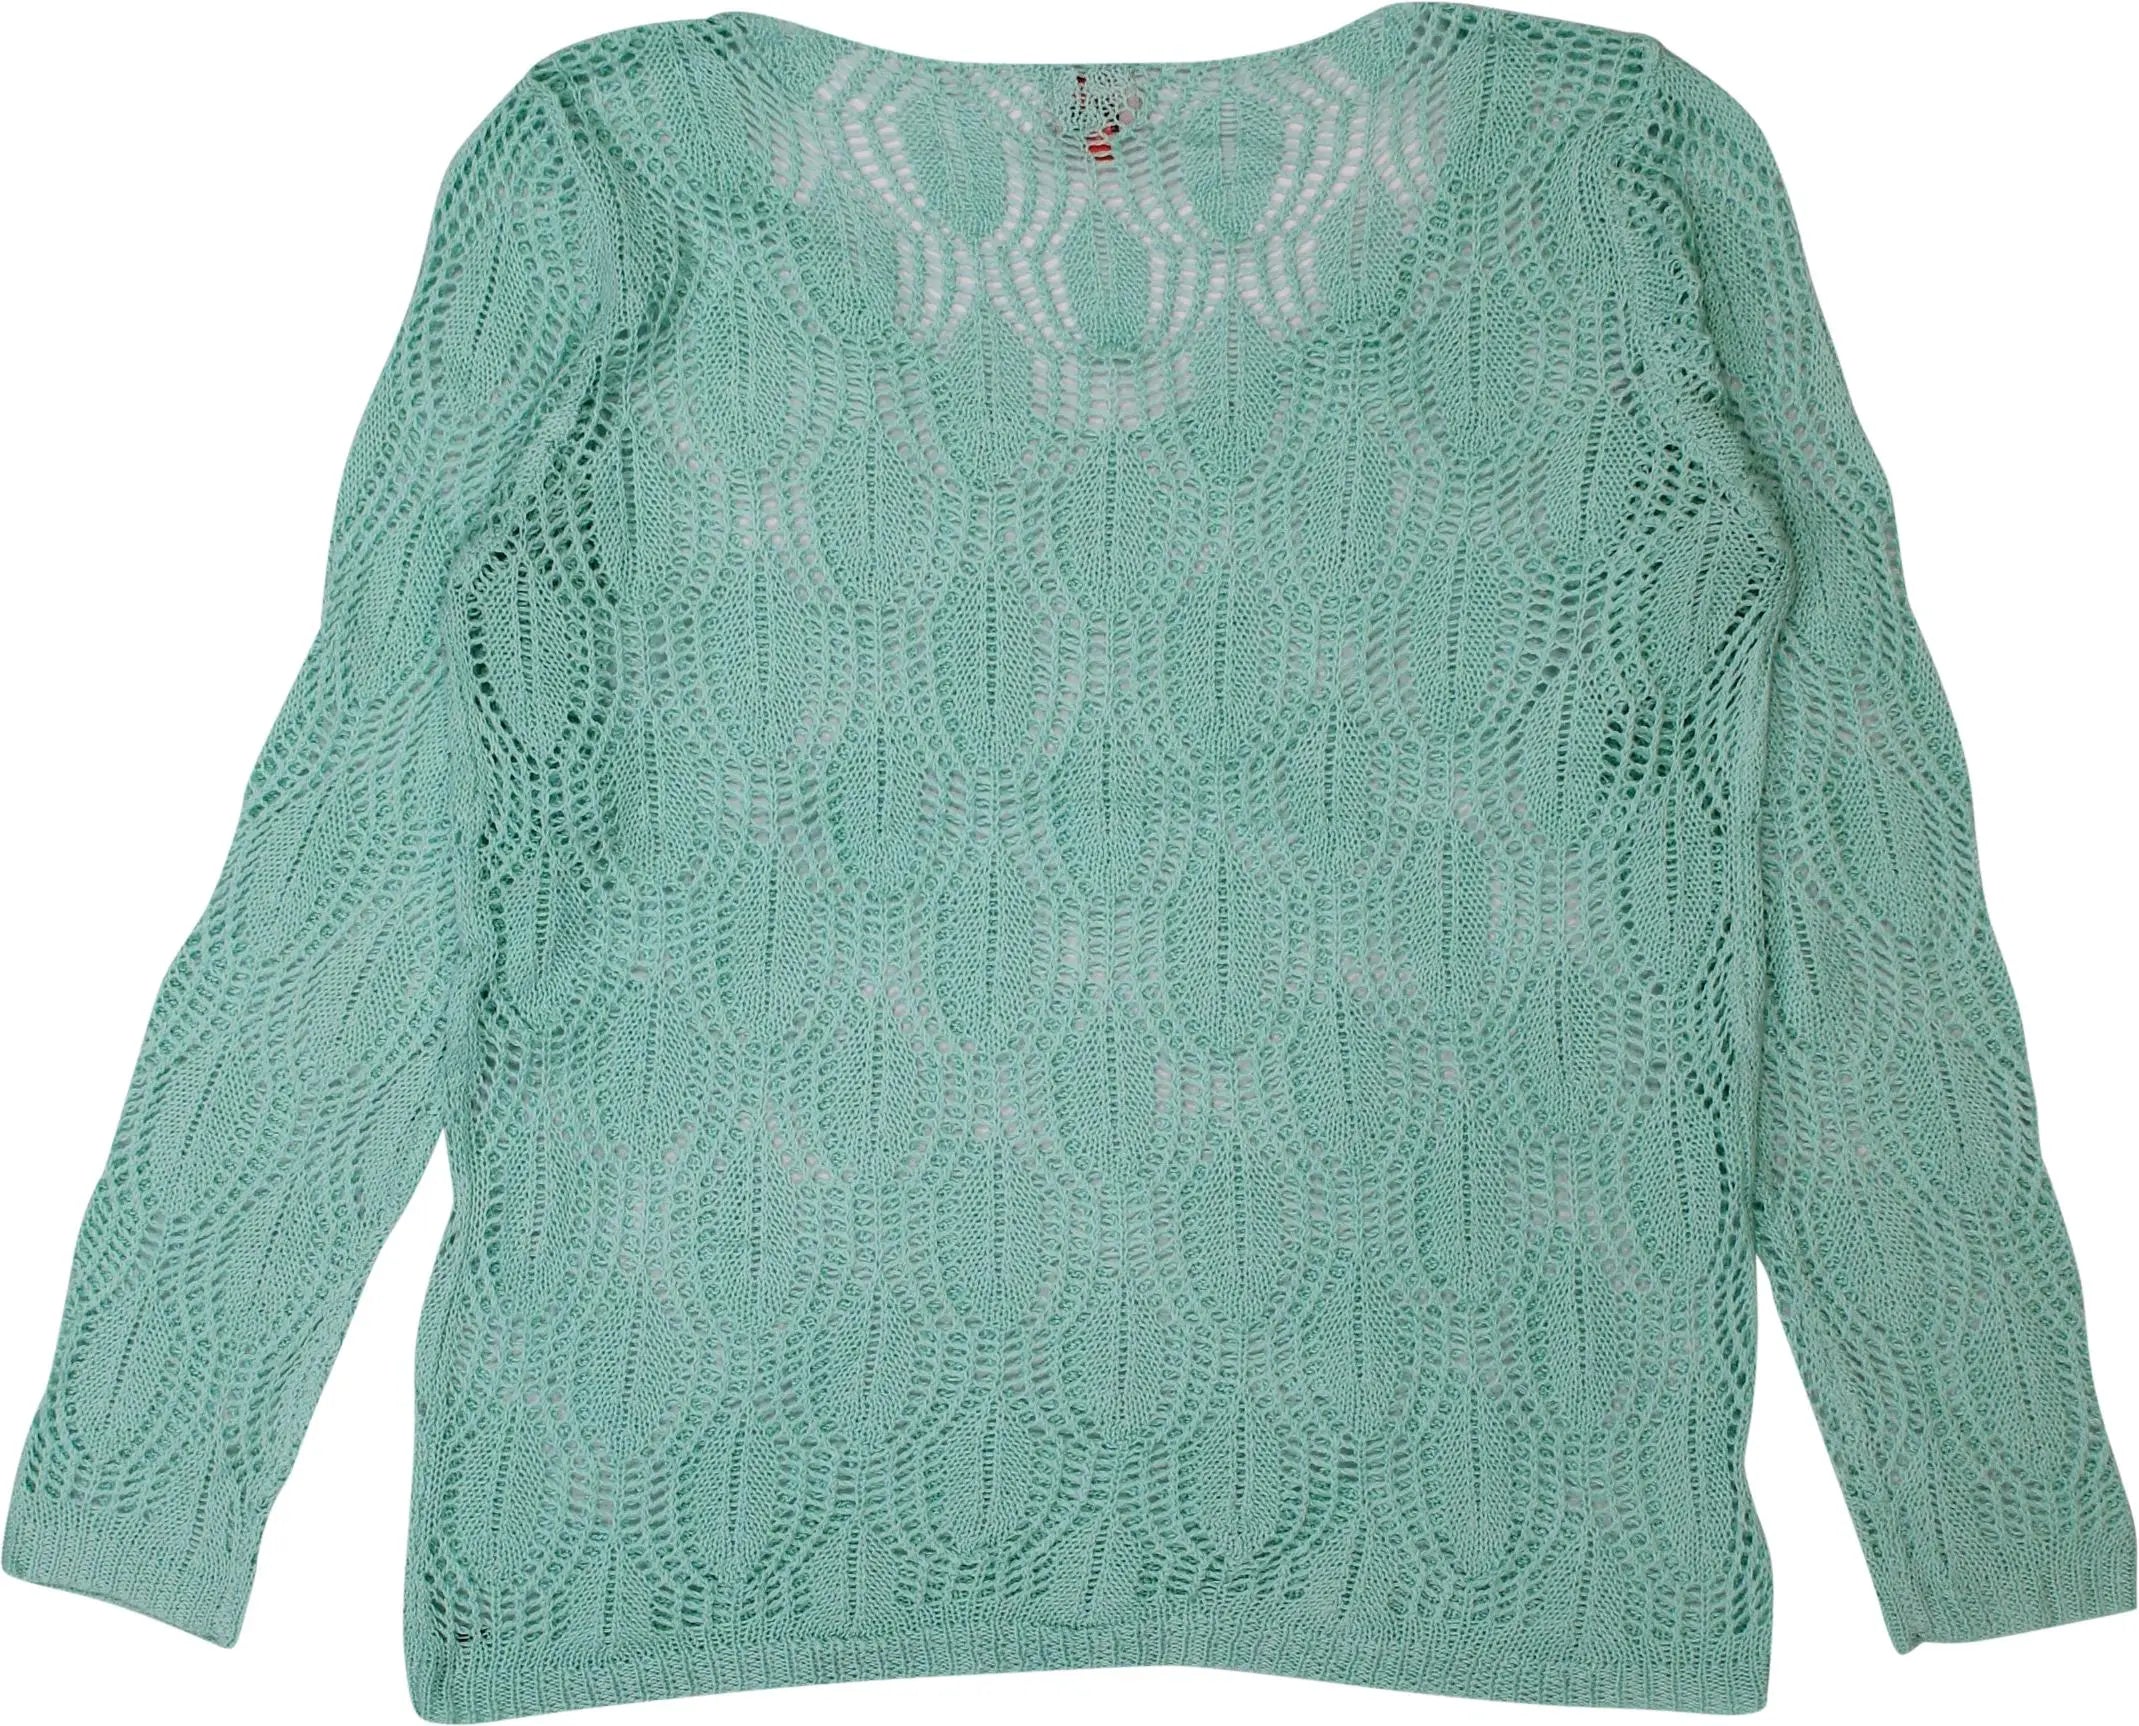 Only - Turquoise Crochet Top- ThriftTale.com - Vintage and second handclothing